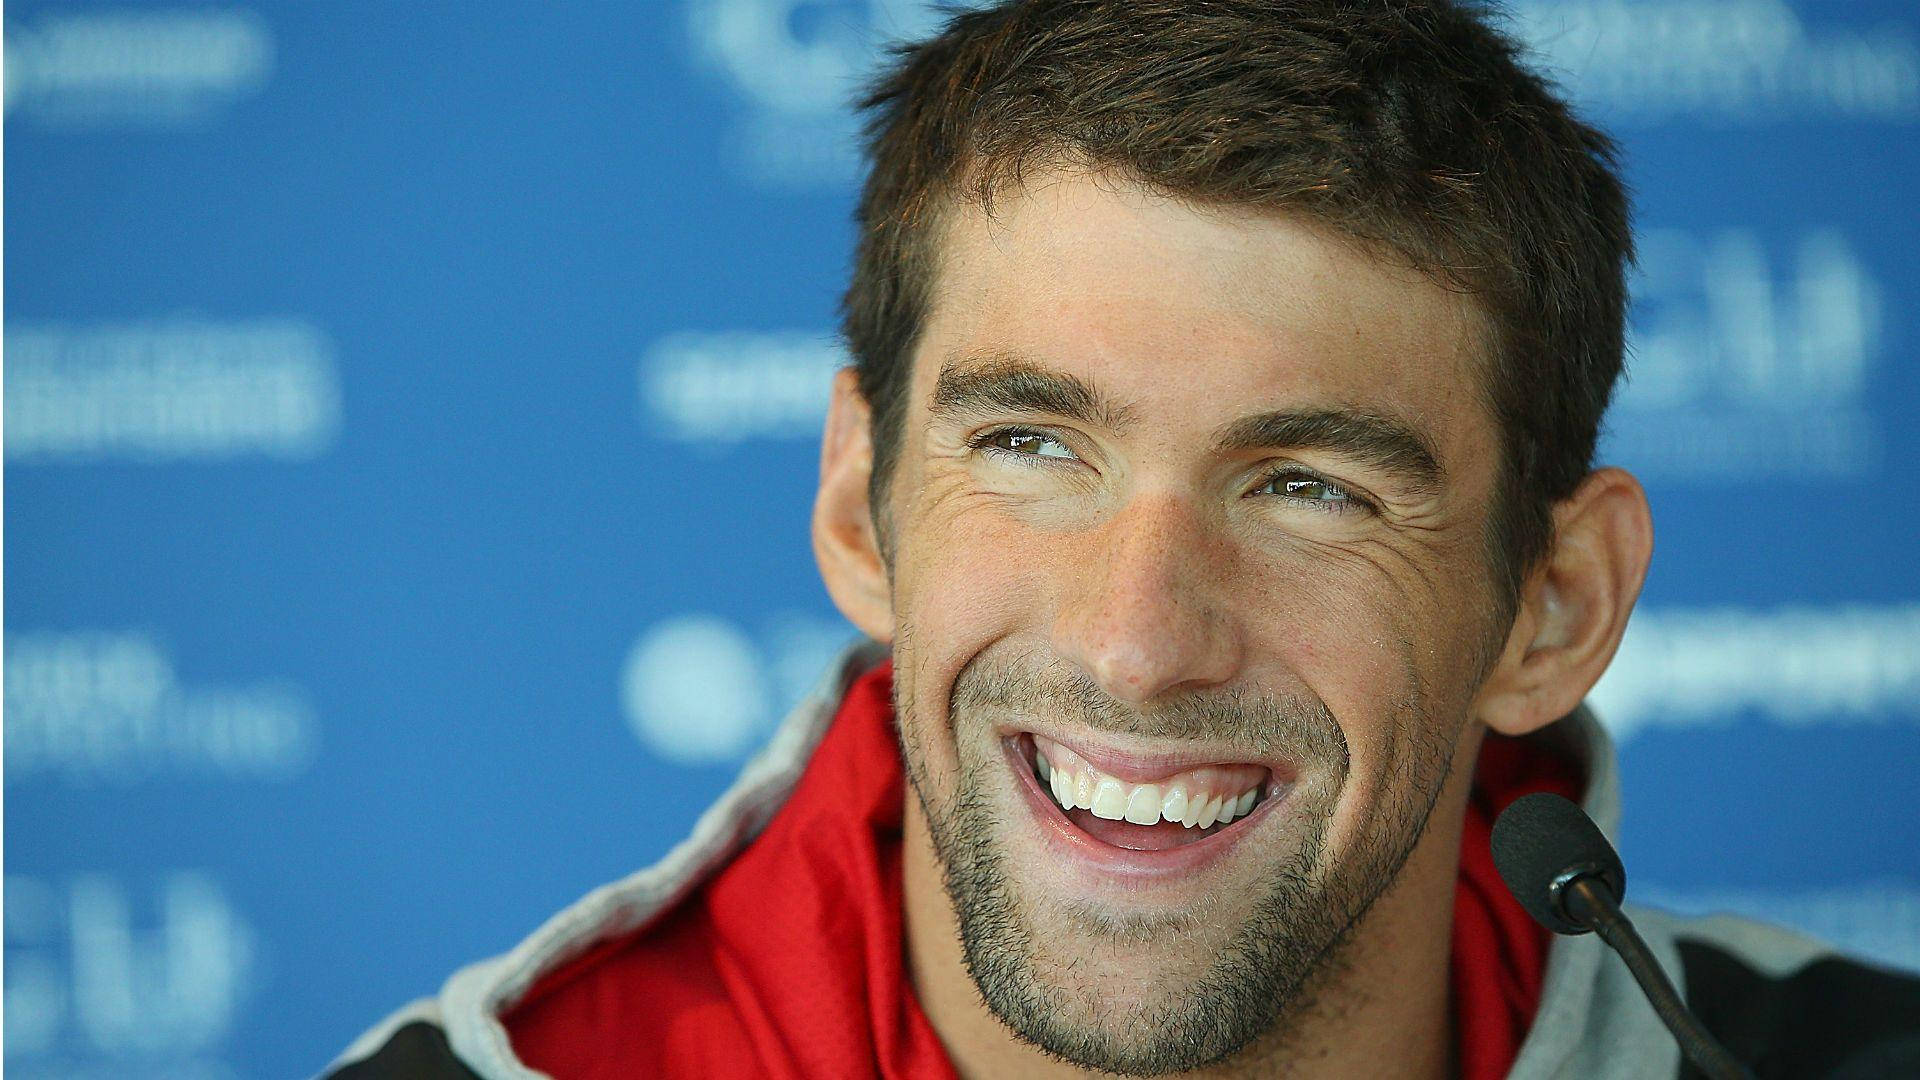 Michael Phelps Interview Background